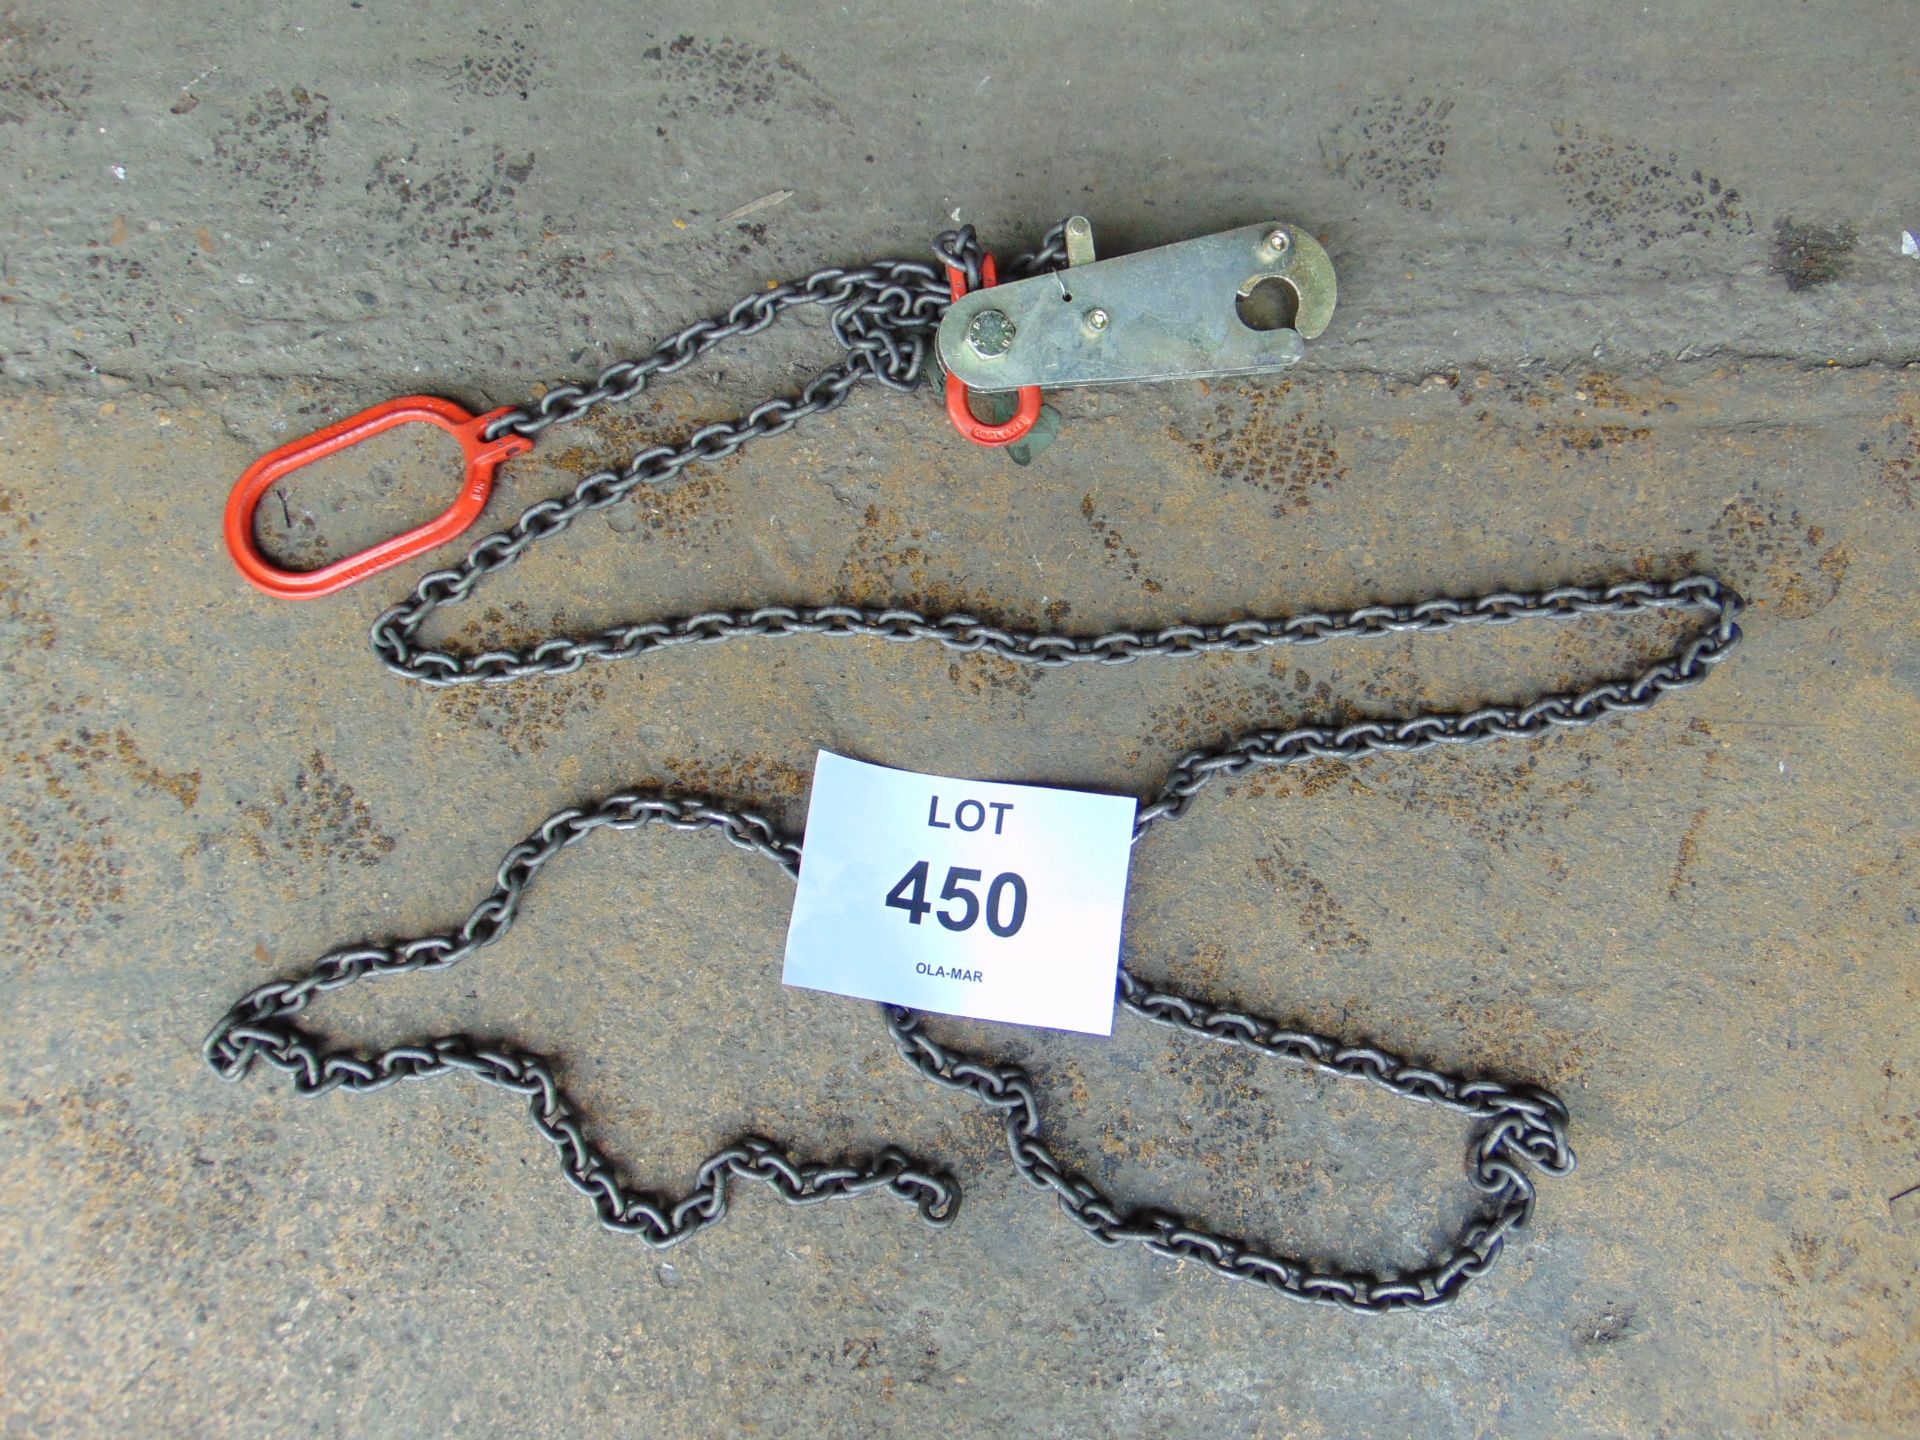 Unissued Lifting Chain w/ Quick Release Hook - From MOD